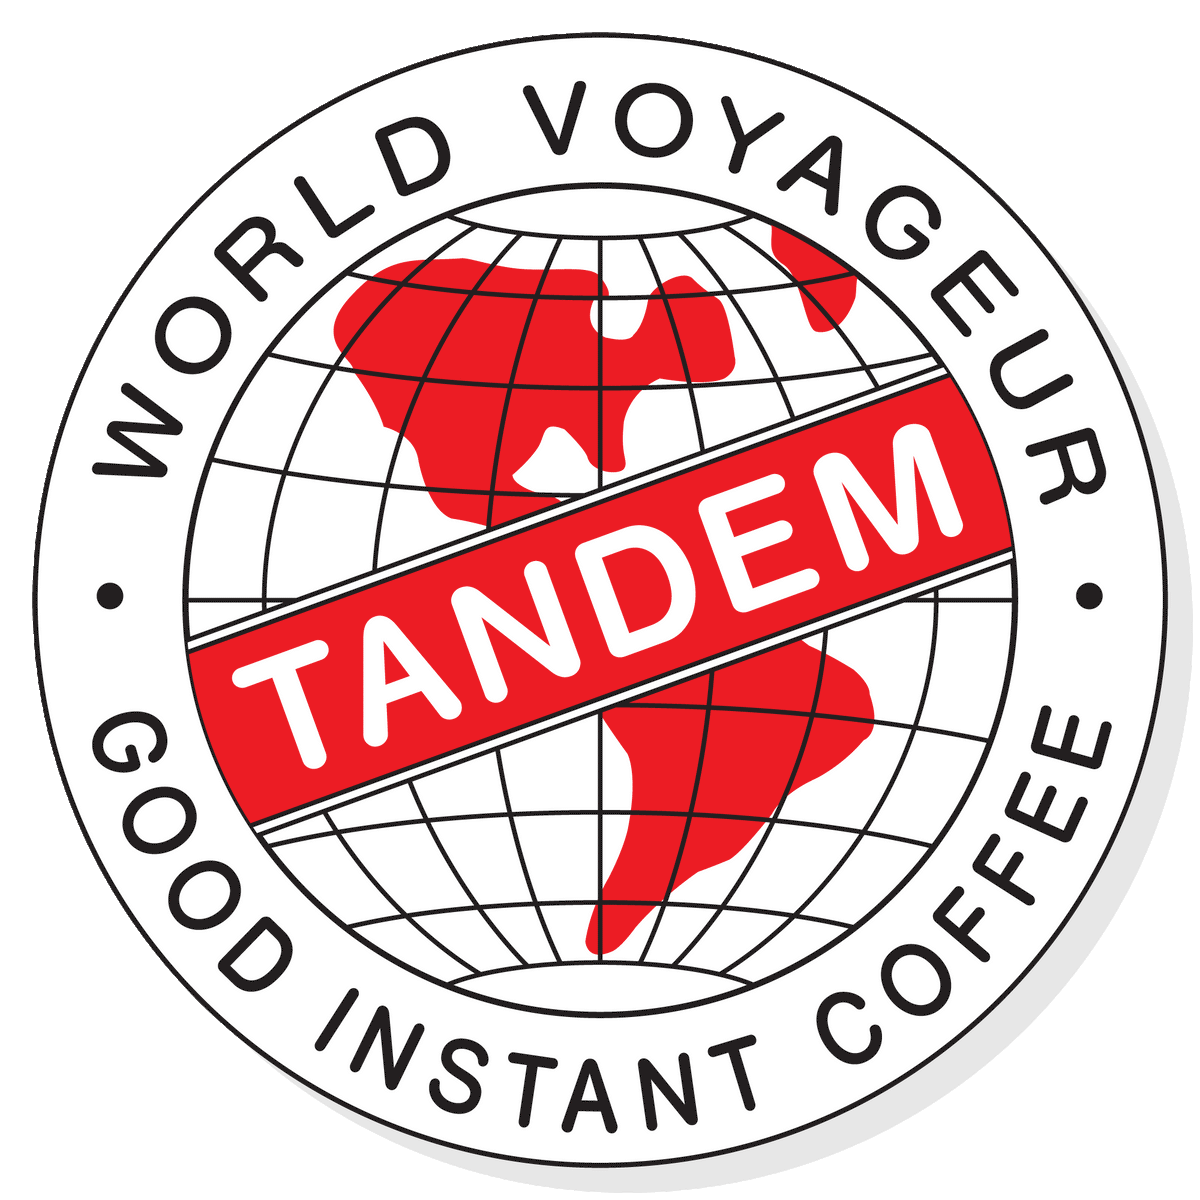 Logo featuring a globe with Africa and parts of Europe and Asia, labeled "Tandem World Voyageur instant coffee packets" with a red diagonal band reading "Tandem Coffee Roasters".